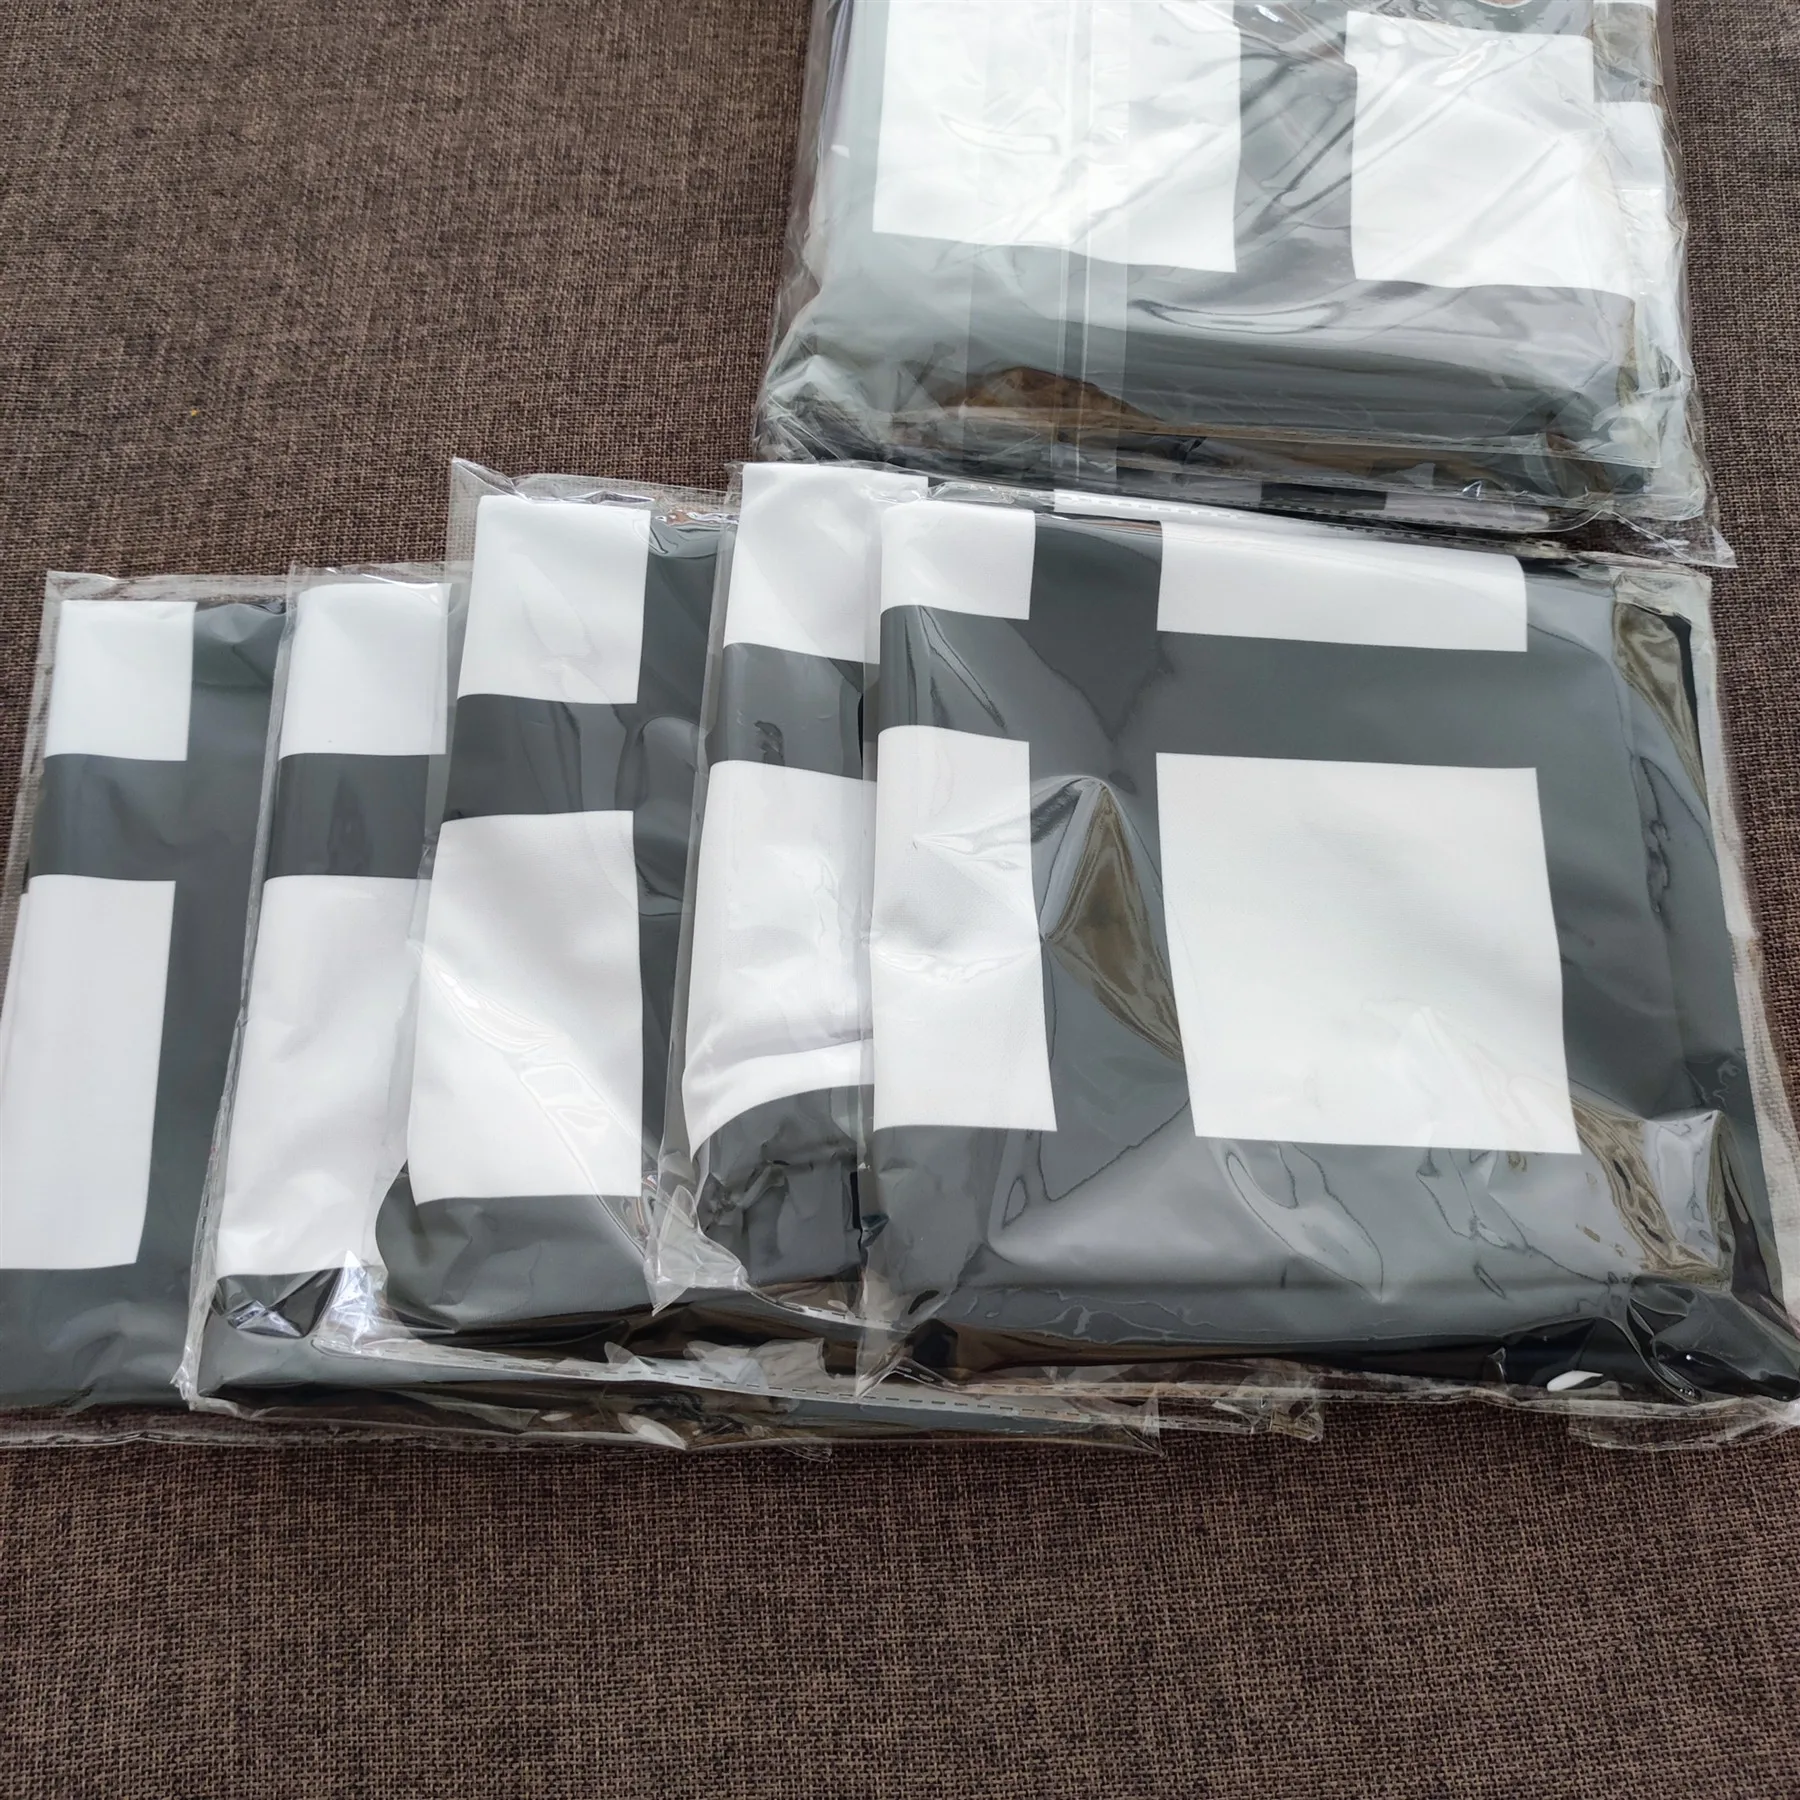 10pcs/Lot Sublimation Blanks Ppillowcase 40x40cm Blank Short Fleece 9 grid 6/4/13 grids Pillow Cover Thermal Transfer Heat Press 4pcs lot blank sublimation 600ml hermos bottle cusfer prtinting by sublimation ink diy transfer heat press printingp tran